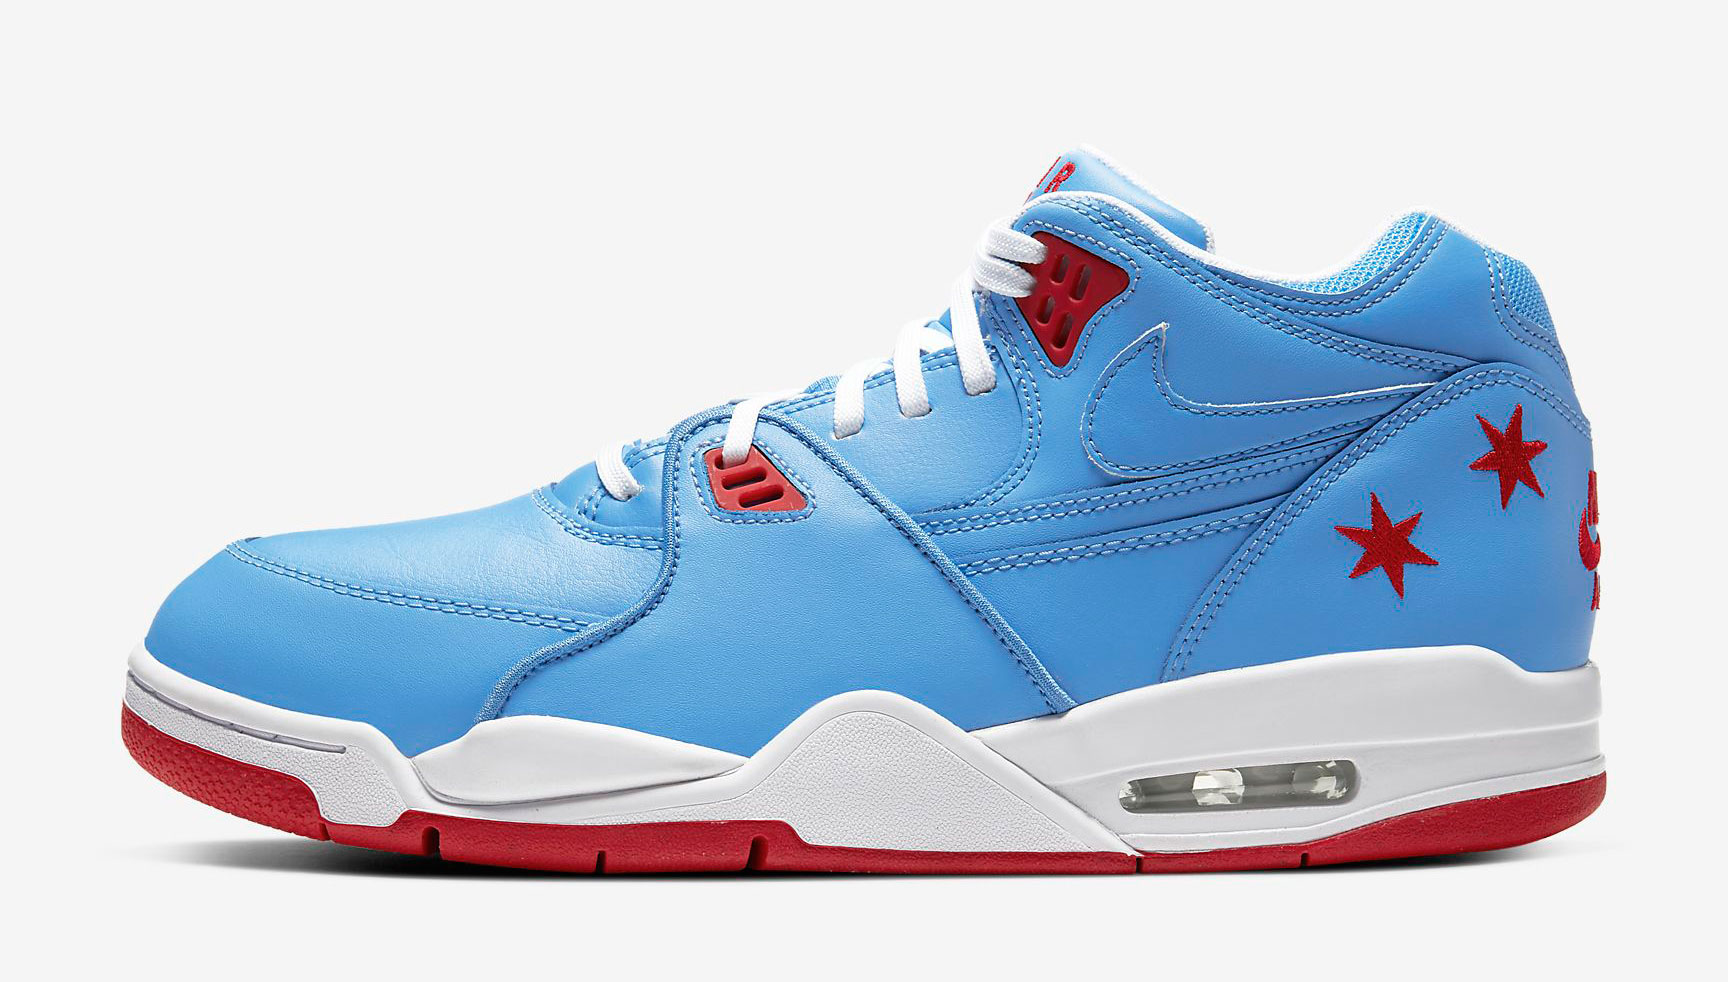 nike-air-flight-89-chicago-release-date